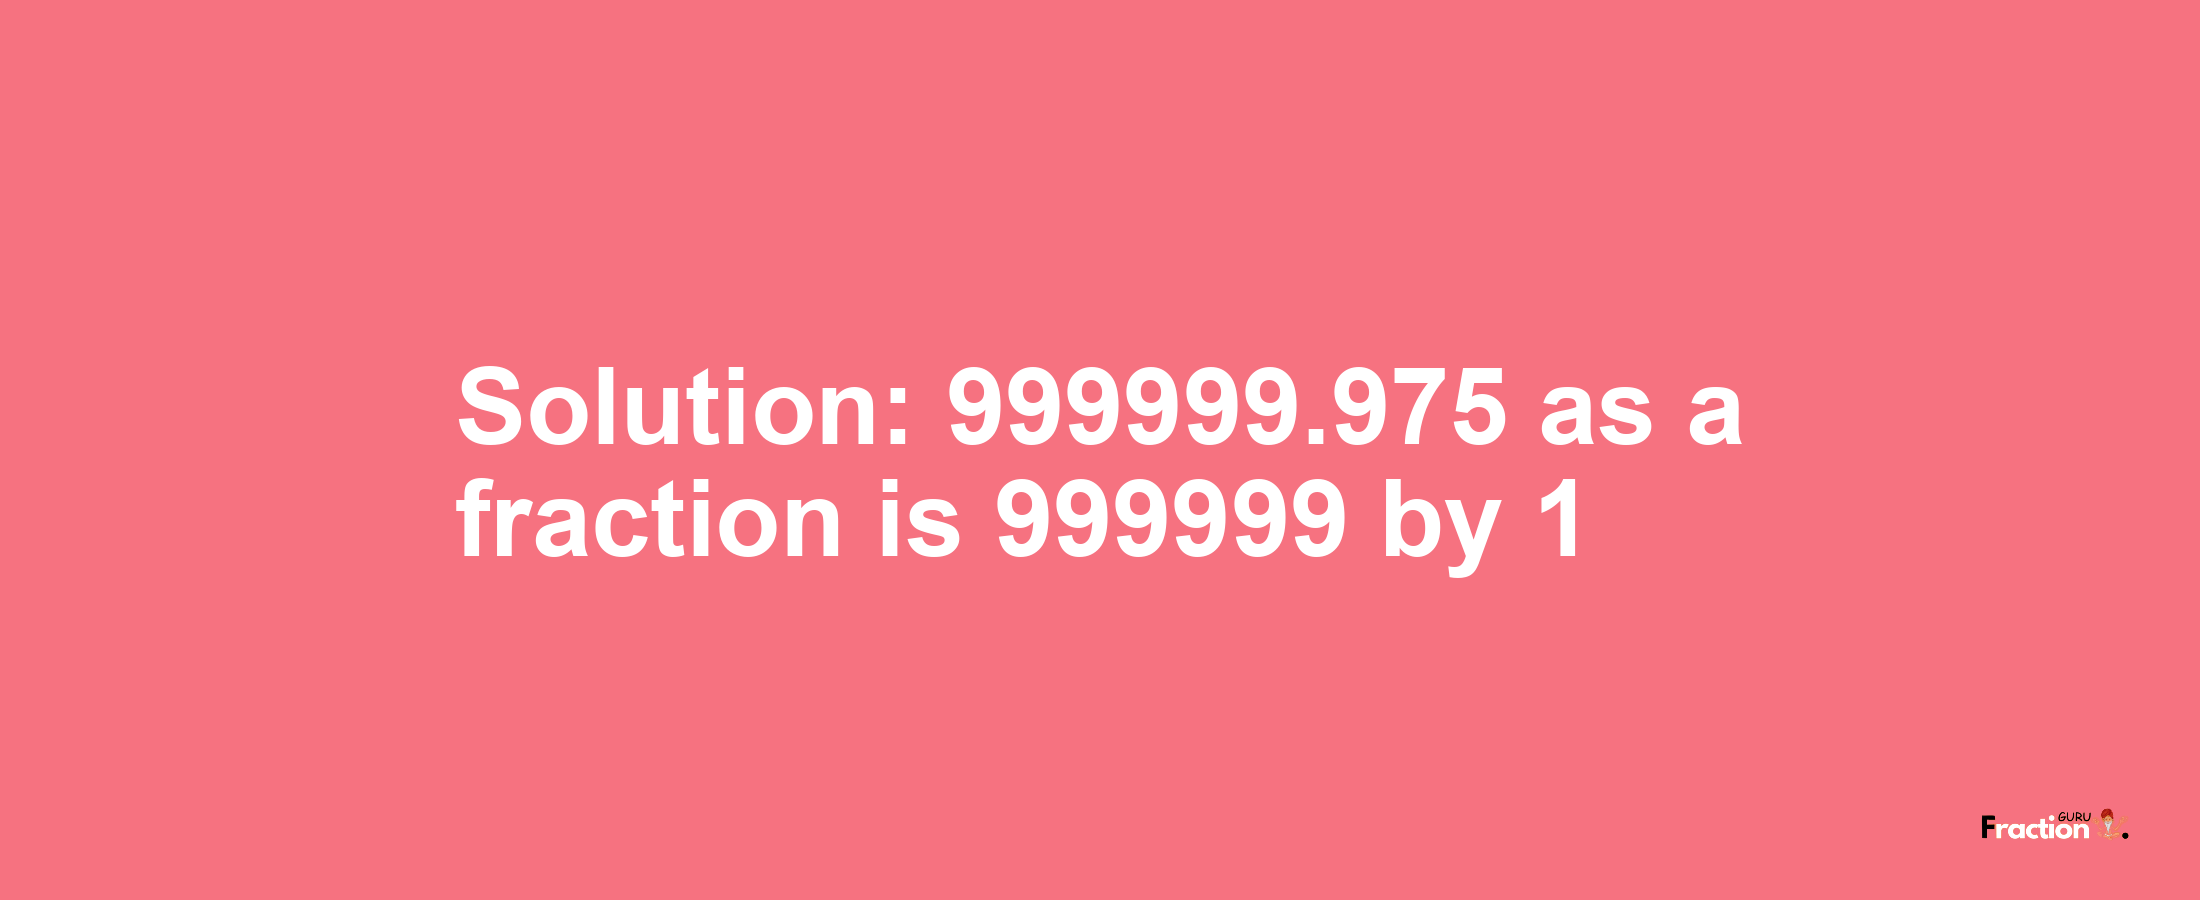 Solution:999999.975 as a fraction is 999999/1